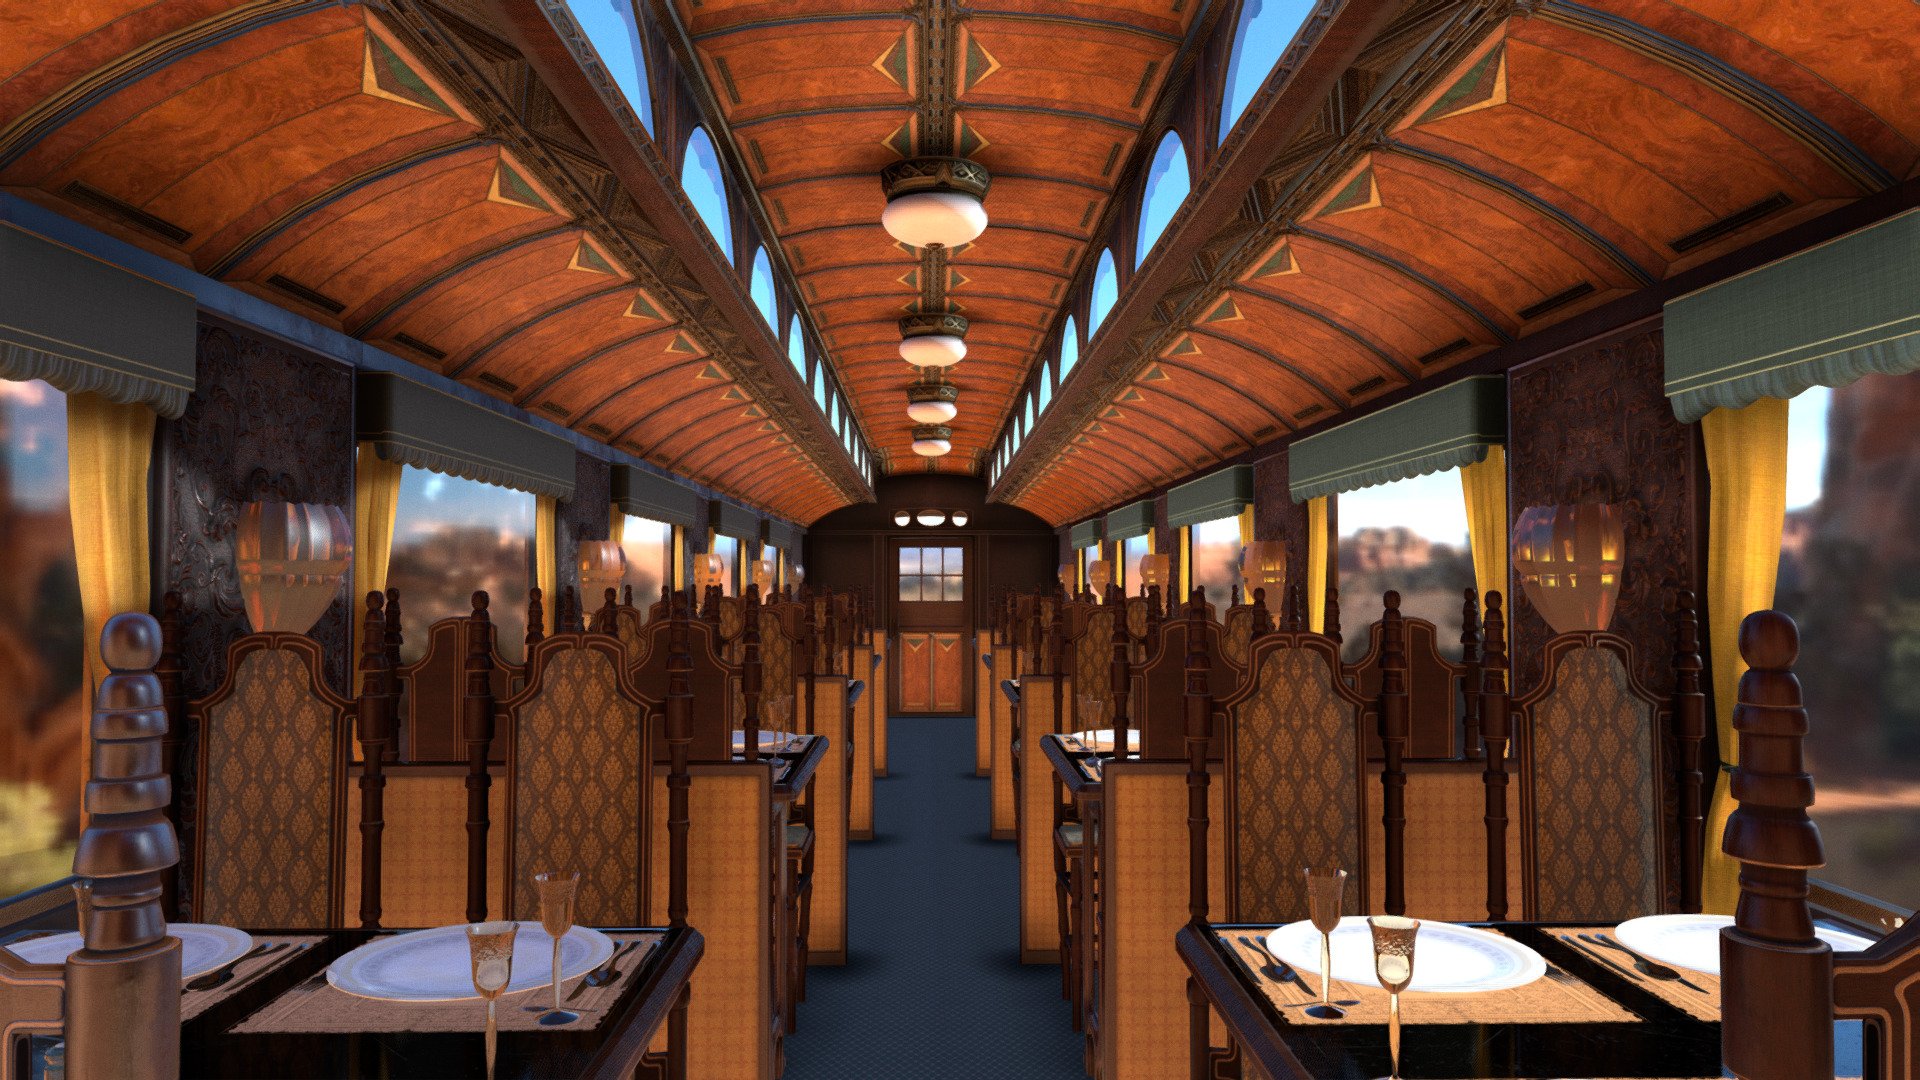 Deluxe Victorian train interior and exterior with optimised textures. 
Includes luxury restaurant accessories such as carved chairs, cloth tablecloths, plates with cutlery and glasses 3d model